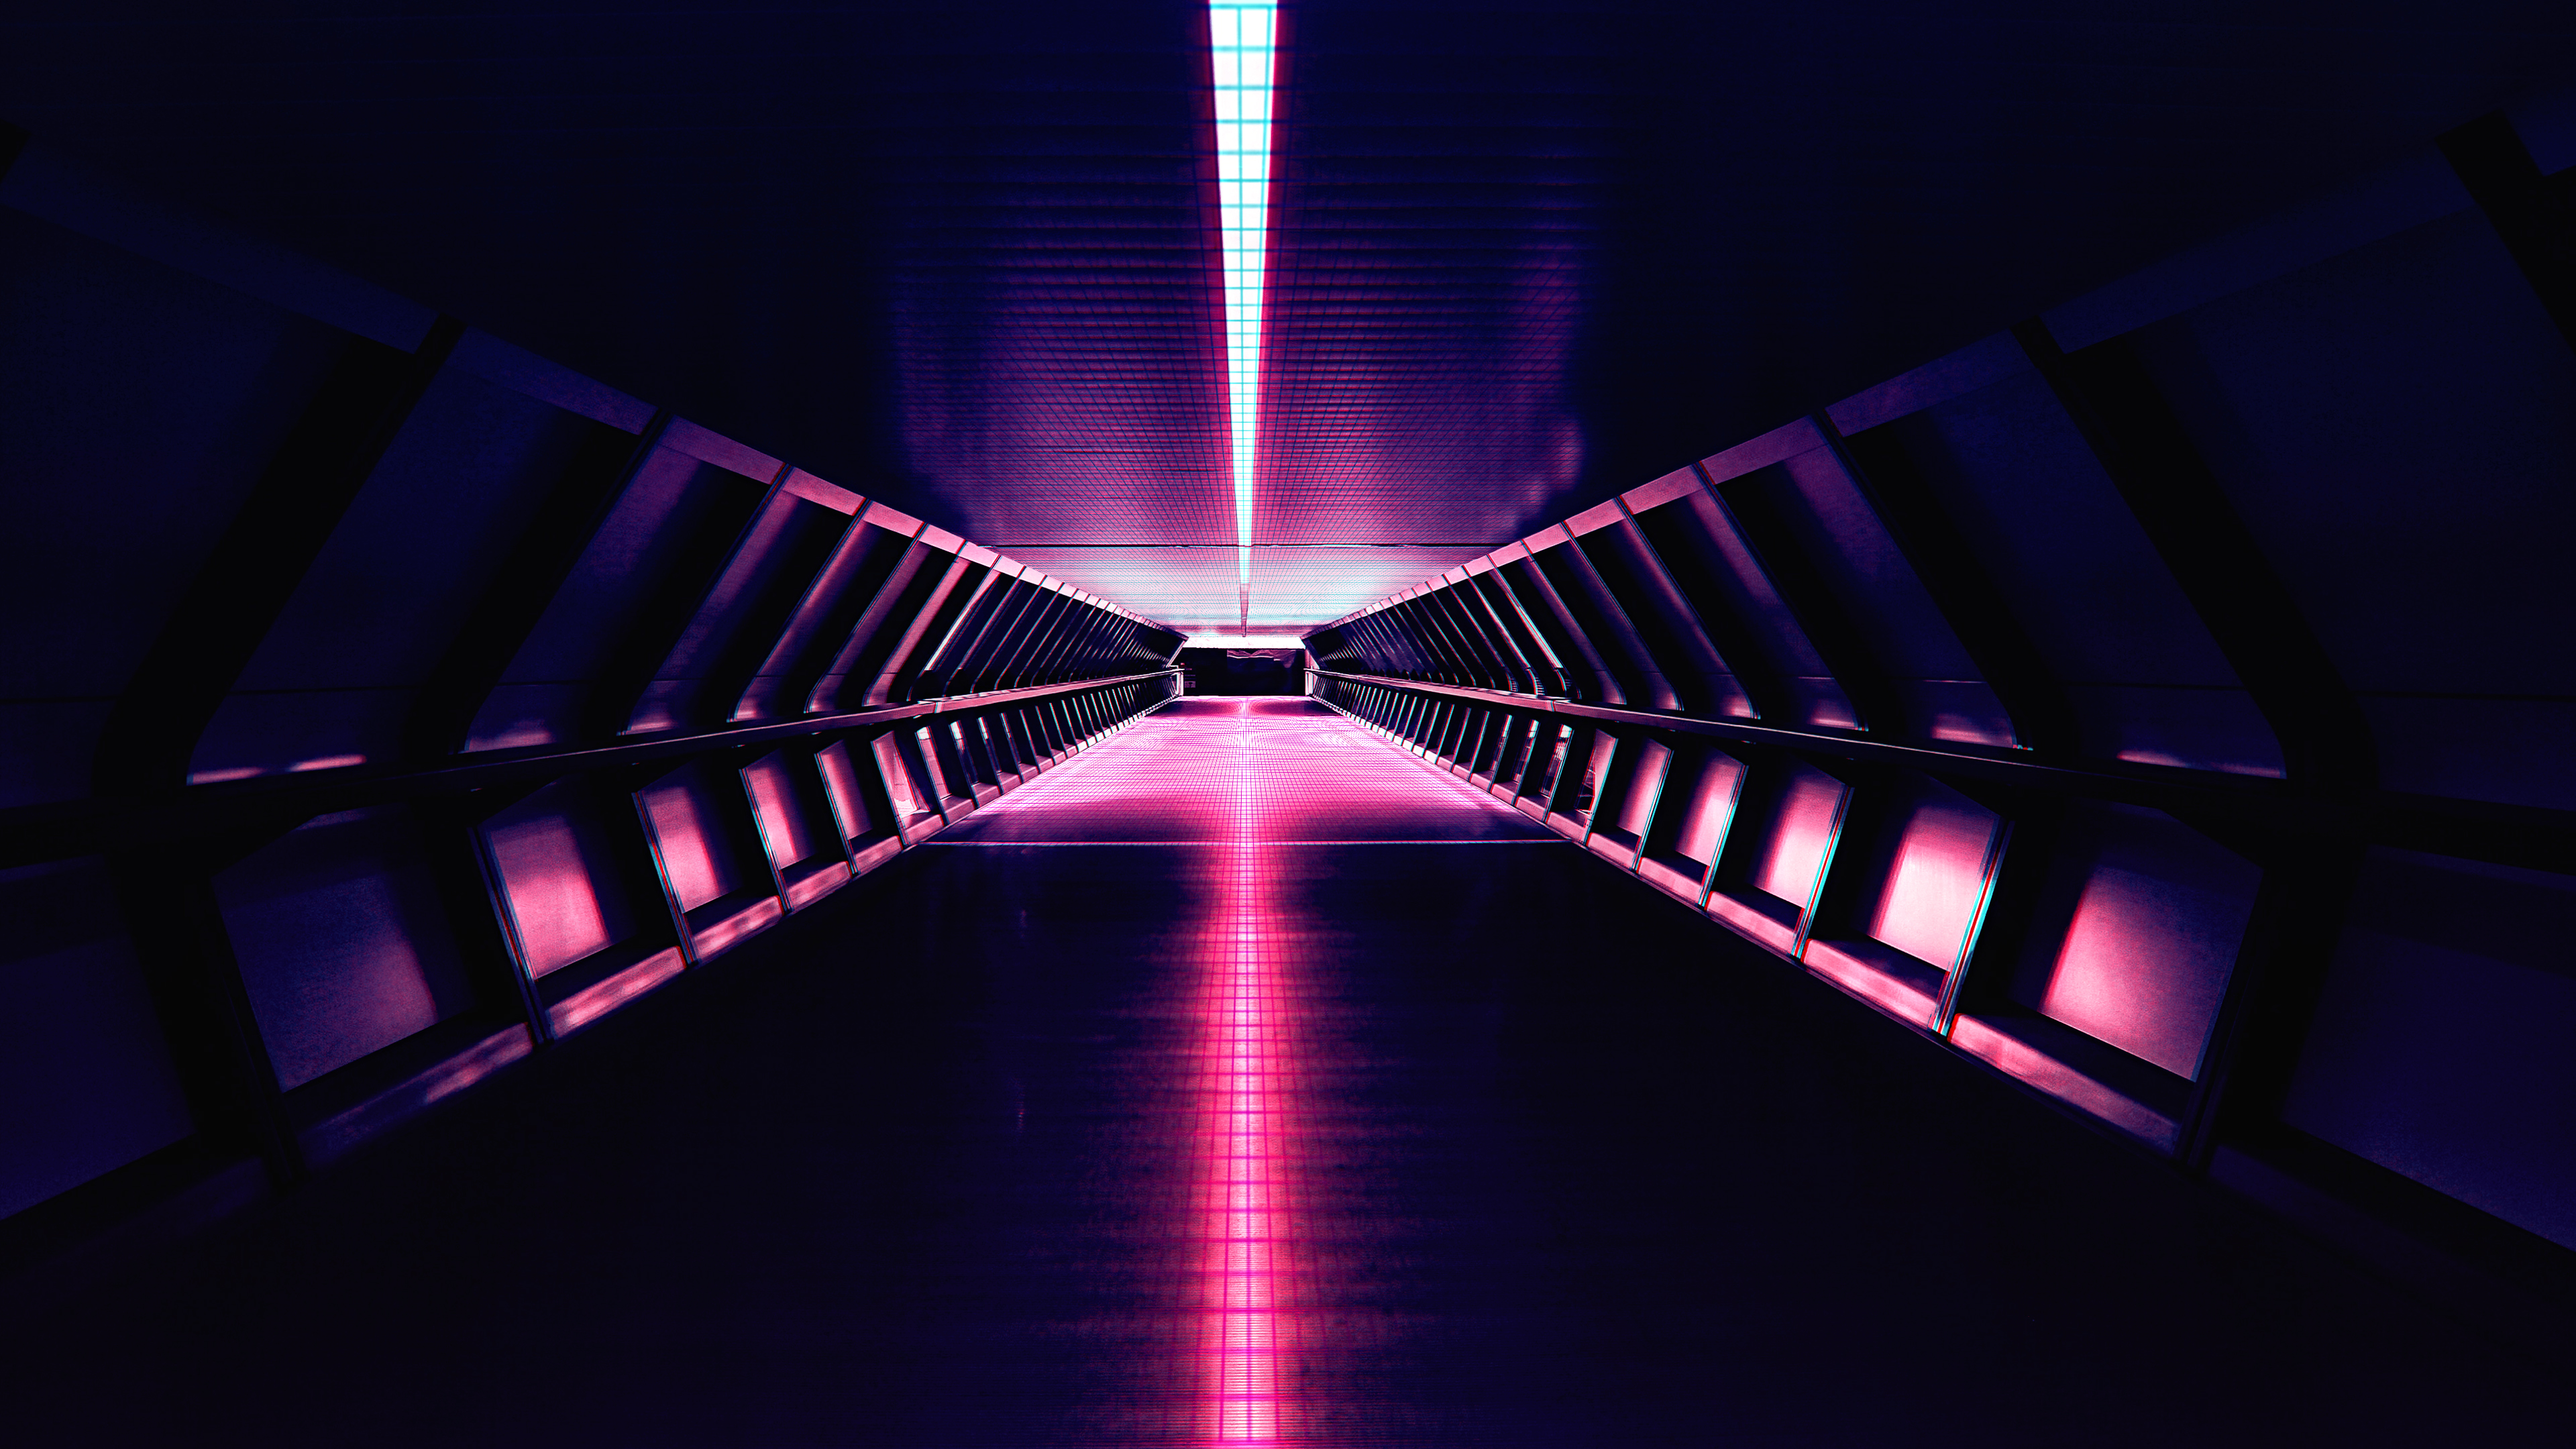 Architecture, Pink, Electronic music, Retro, Purple, Neon, 4K, Synthwave. Mocah HD Wallpaper